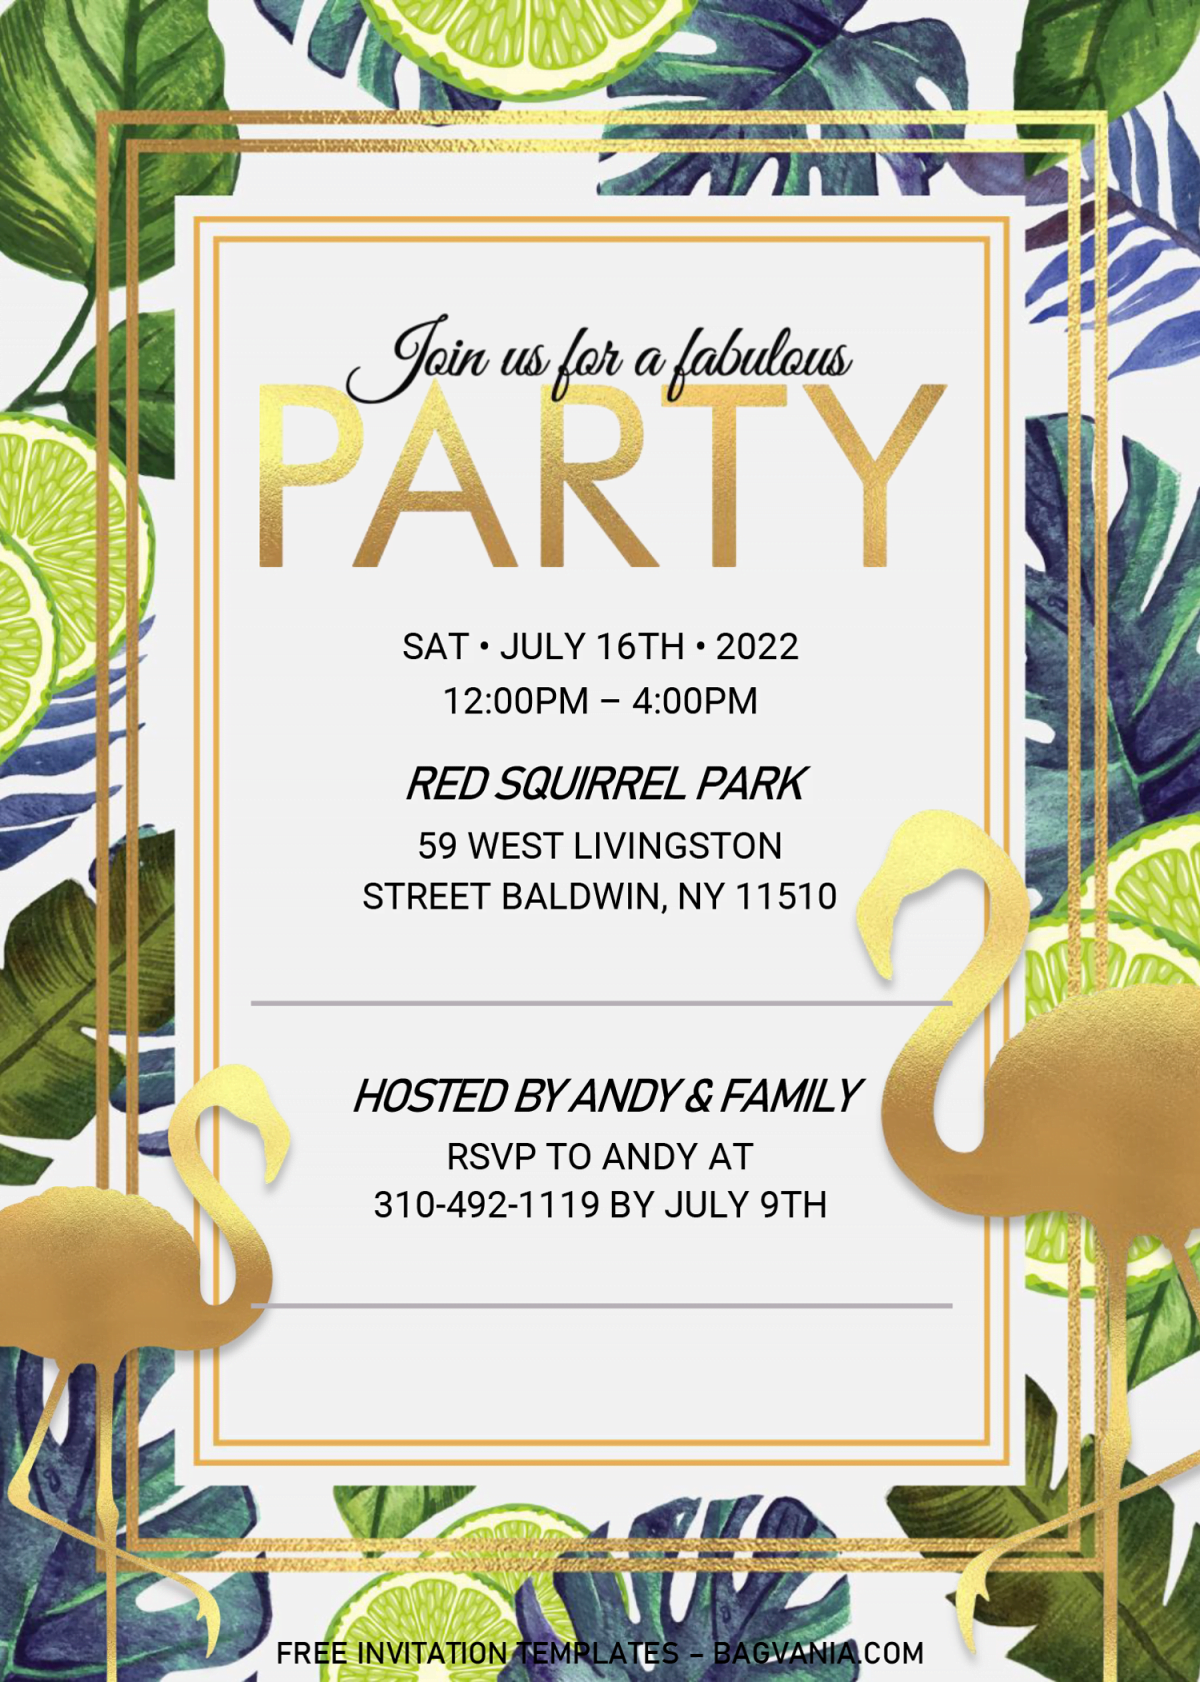 Summer Party Invitation Templates - Editable .Docx and has gold text frame